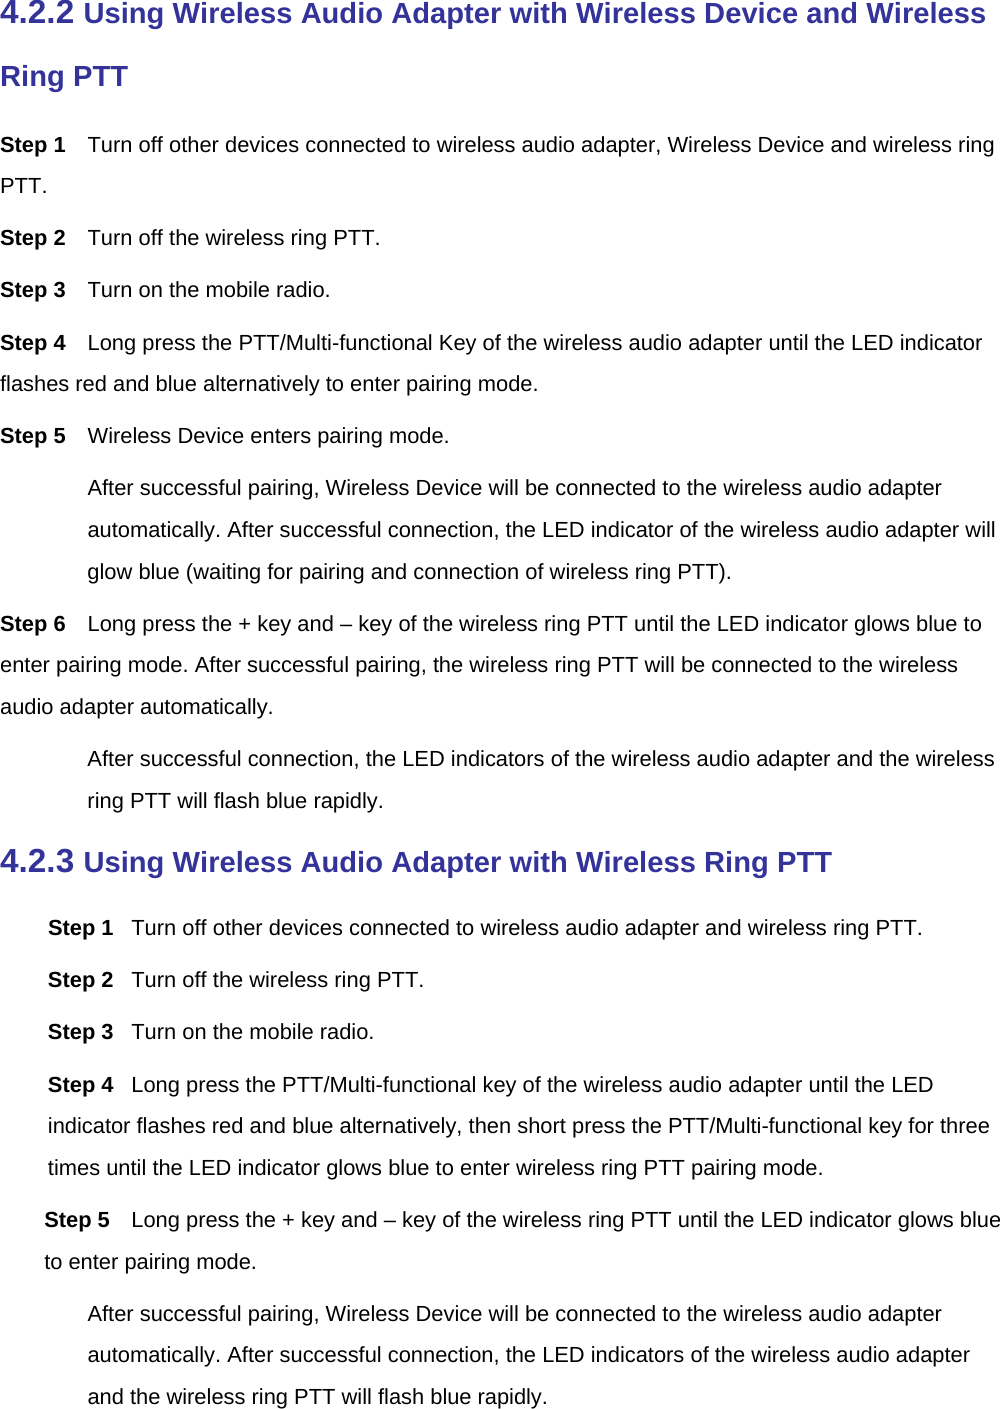  4.2.2 Using Wireless Audio Adapter with Wireless Device and Wireless Ring PTT Step 1  Turn off other devices connected to wireless audio adapter, Wireless Device and wireless ring PTT.  Step 2  Turn off the wireless ring PTT.   Step 3  Turn on the mobile radio.   Step 4  Long press the PTT/Multi-functional Key of the wireless audio adapter until the LED indicator flashes red and blue alternatively to enter pairing mode.   Step 5  Wireless Device enters pairing mode.   After successful pairing, Wireless Device will be connected to the wireless audio adapter automatically. After successful connection, the LED indicator of the wireless audio adapter will glow blue (waiting for pairing and connection of wireless ring PTT).   Step 6  Long press the + key and – key of the wireless ring PTT until the LED indicator glows blue to enter pairing mode. After successful pairing, the wireless ring PTT will be connected to the wireless audio adapter automatically.   After successful connection, the LED indicators of the wireless audio adapter and the wireless ring PTT will flash blue rapidly.   4.2.3 Using Wireless Audio Adapter with Wireless Ring PTT Step 1  Turn off other devices connected to wireless audio adapter and wireless ring PTT.   Step 2  Turn off the wireless ring PTT.   Step 3  Turn on the mobile radio.   Step 4  Long press the PTT/Multi-functional key of the wireless audio adapter until the LED indicator flashes red and blue alternatively, then short press the PTT/Multi-functional key for three times until the LED indicator glows blue to enter wireless ring PTT pairing mode.   Step 5  Long press the + key and – key of the wireless ring PTT until the LED indicator glows blue to enter pairing mode.   After successful pairing, Wireless Device will be connected to the wireless audio adapter automatically. After successful connection, the LED indicators of the wireless audio adapter and the wireless ring PTT will flash blue rapidly.   